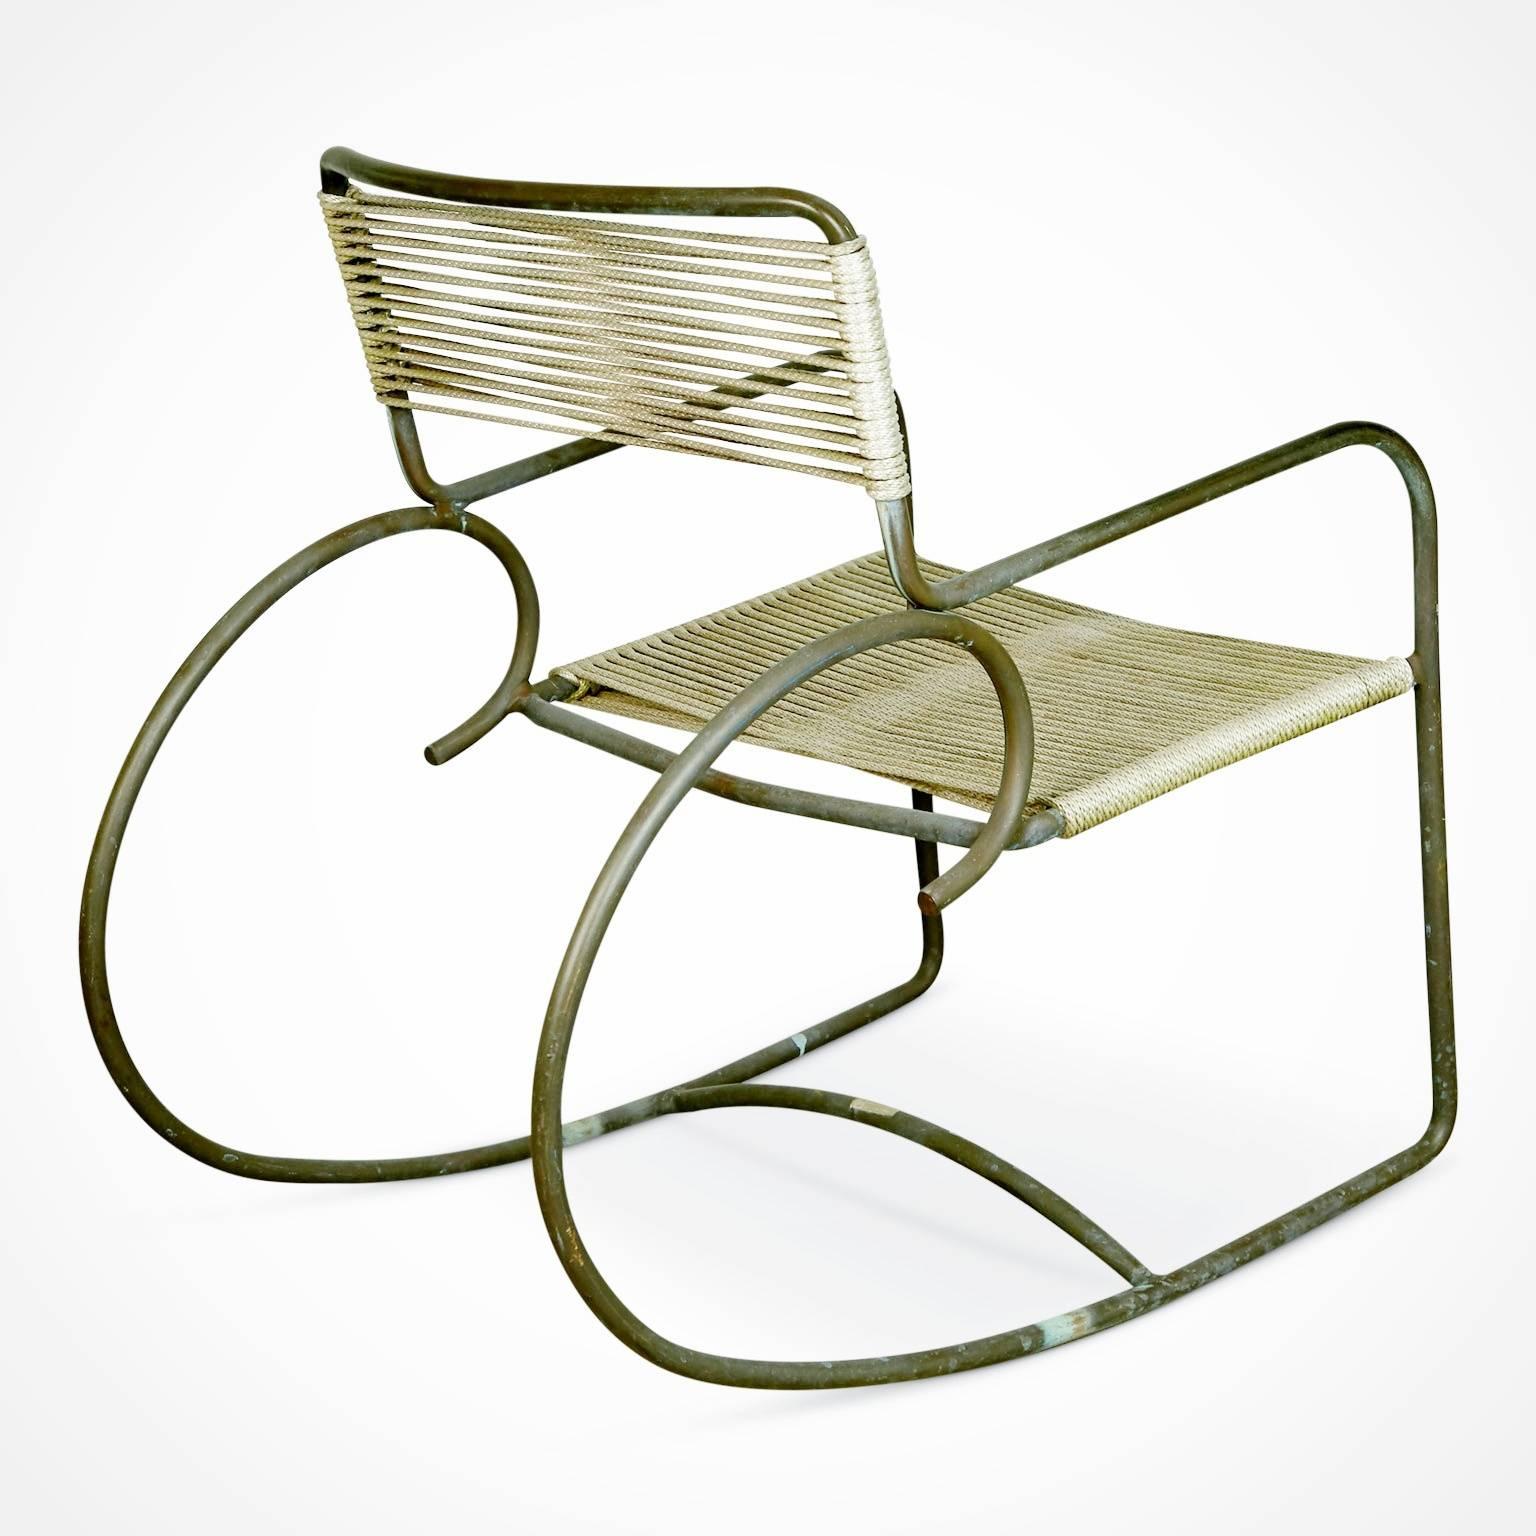 Mid-20th Century Signed Walter Lamb for Brown-Jordan Bronze Outdoor Rocking Chair, circa 1950